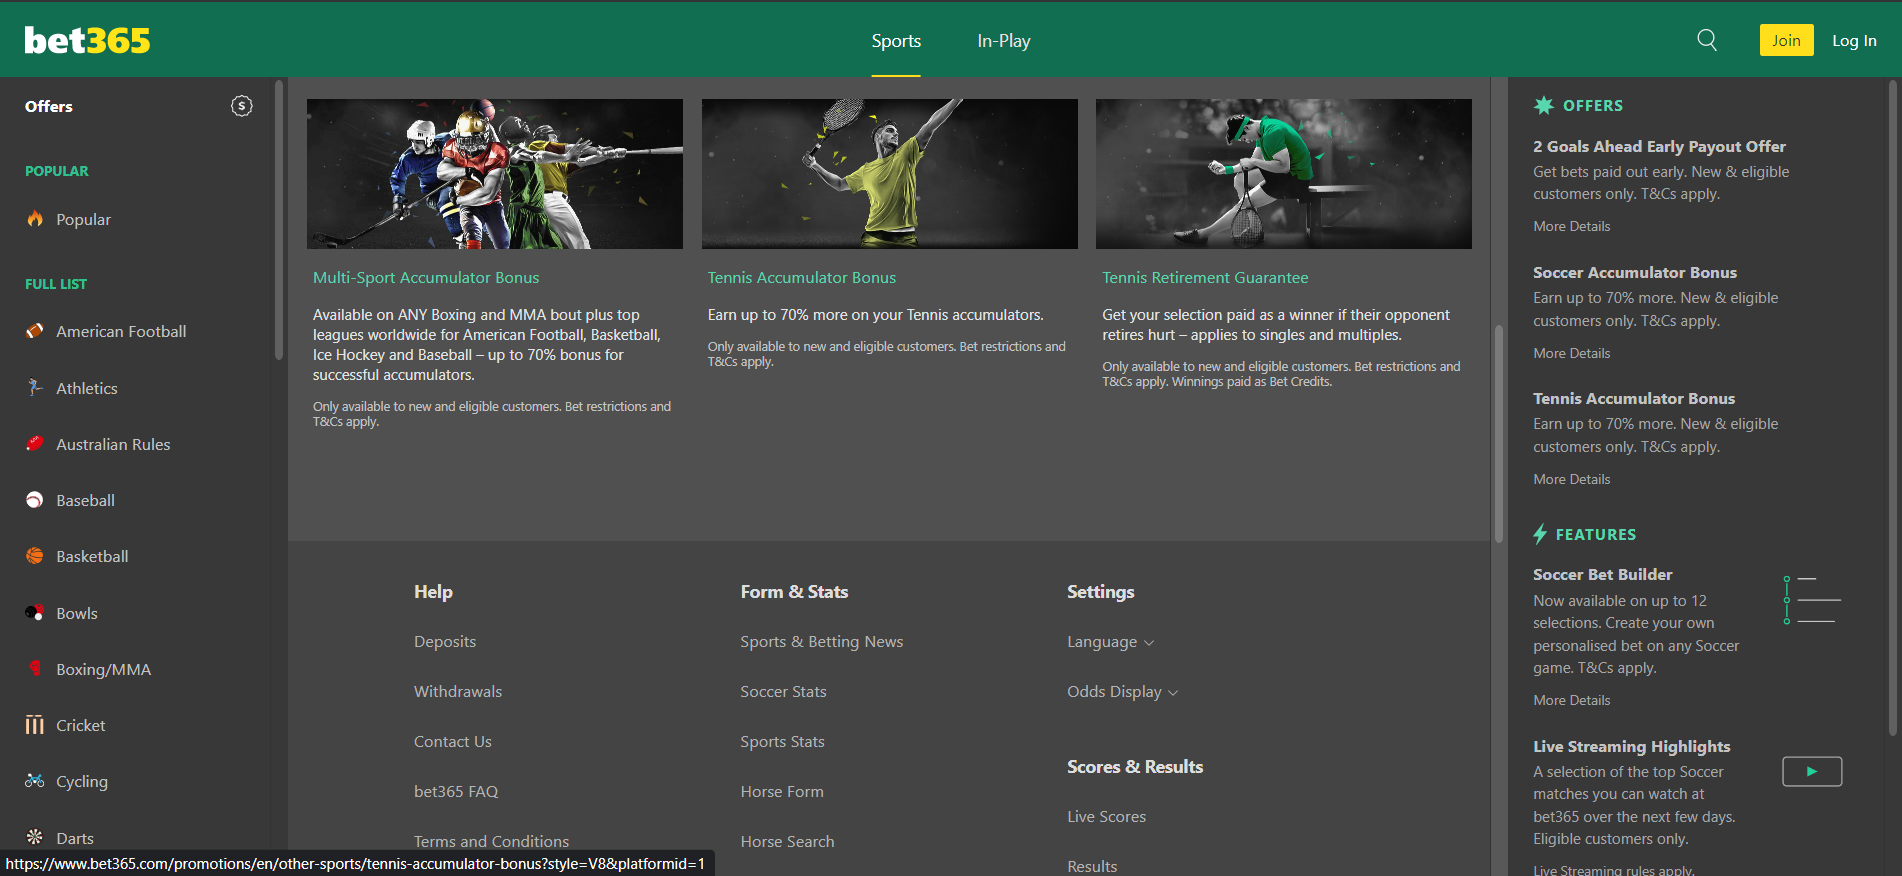 Image of Bet365 homepage